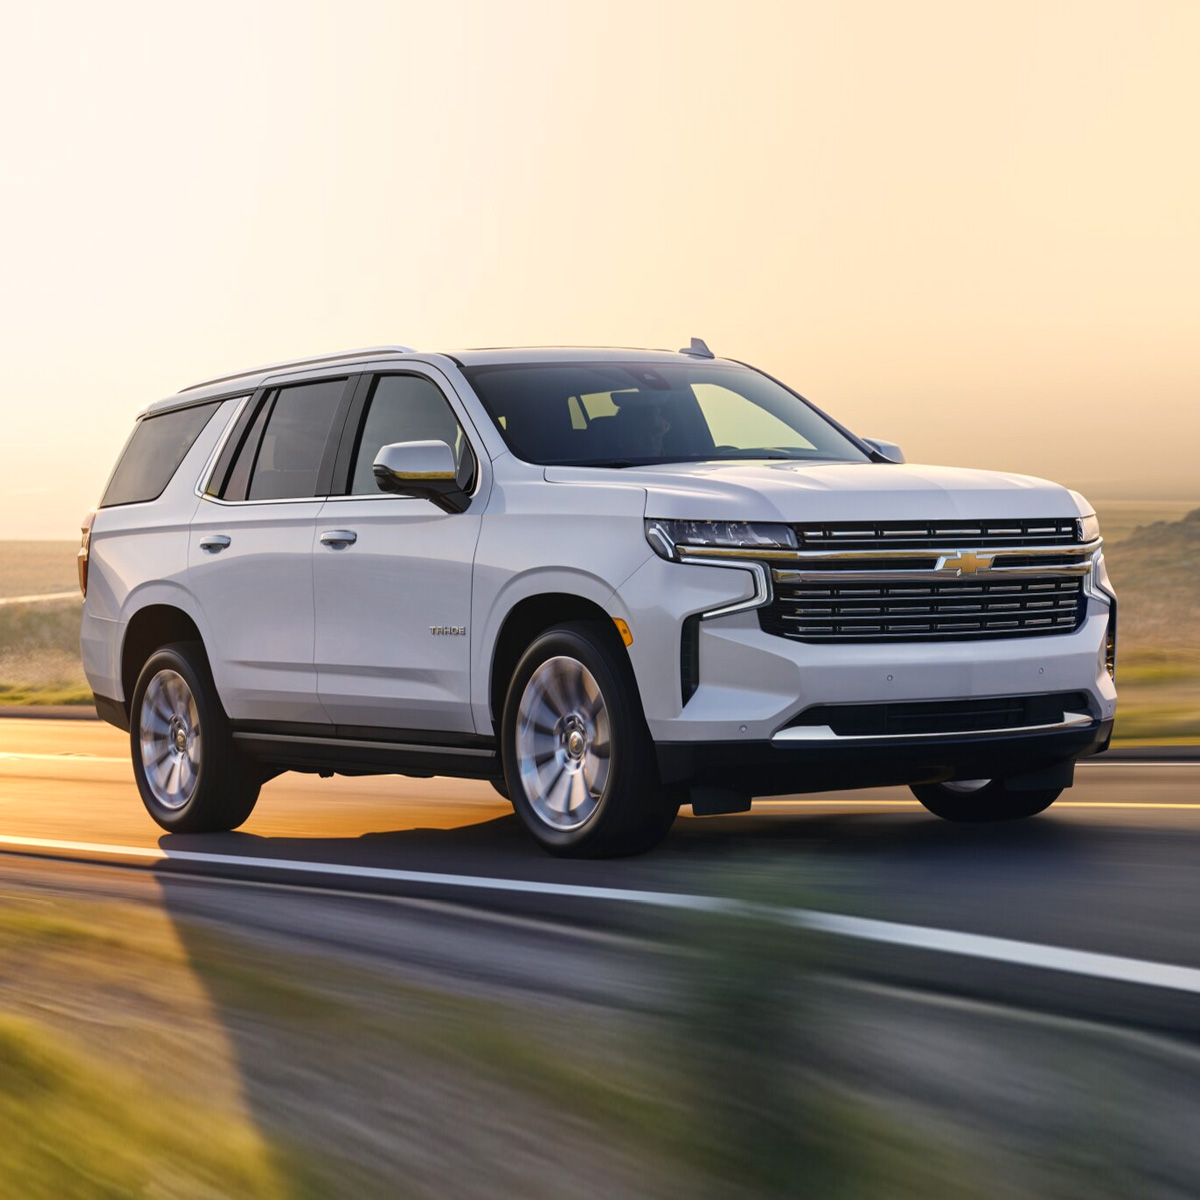 side profile of chevrolet tahoe suv in white color driving down a road with mountains in the background at sunset